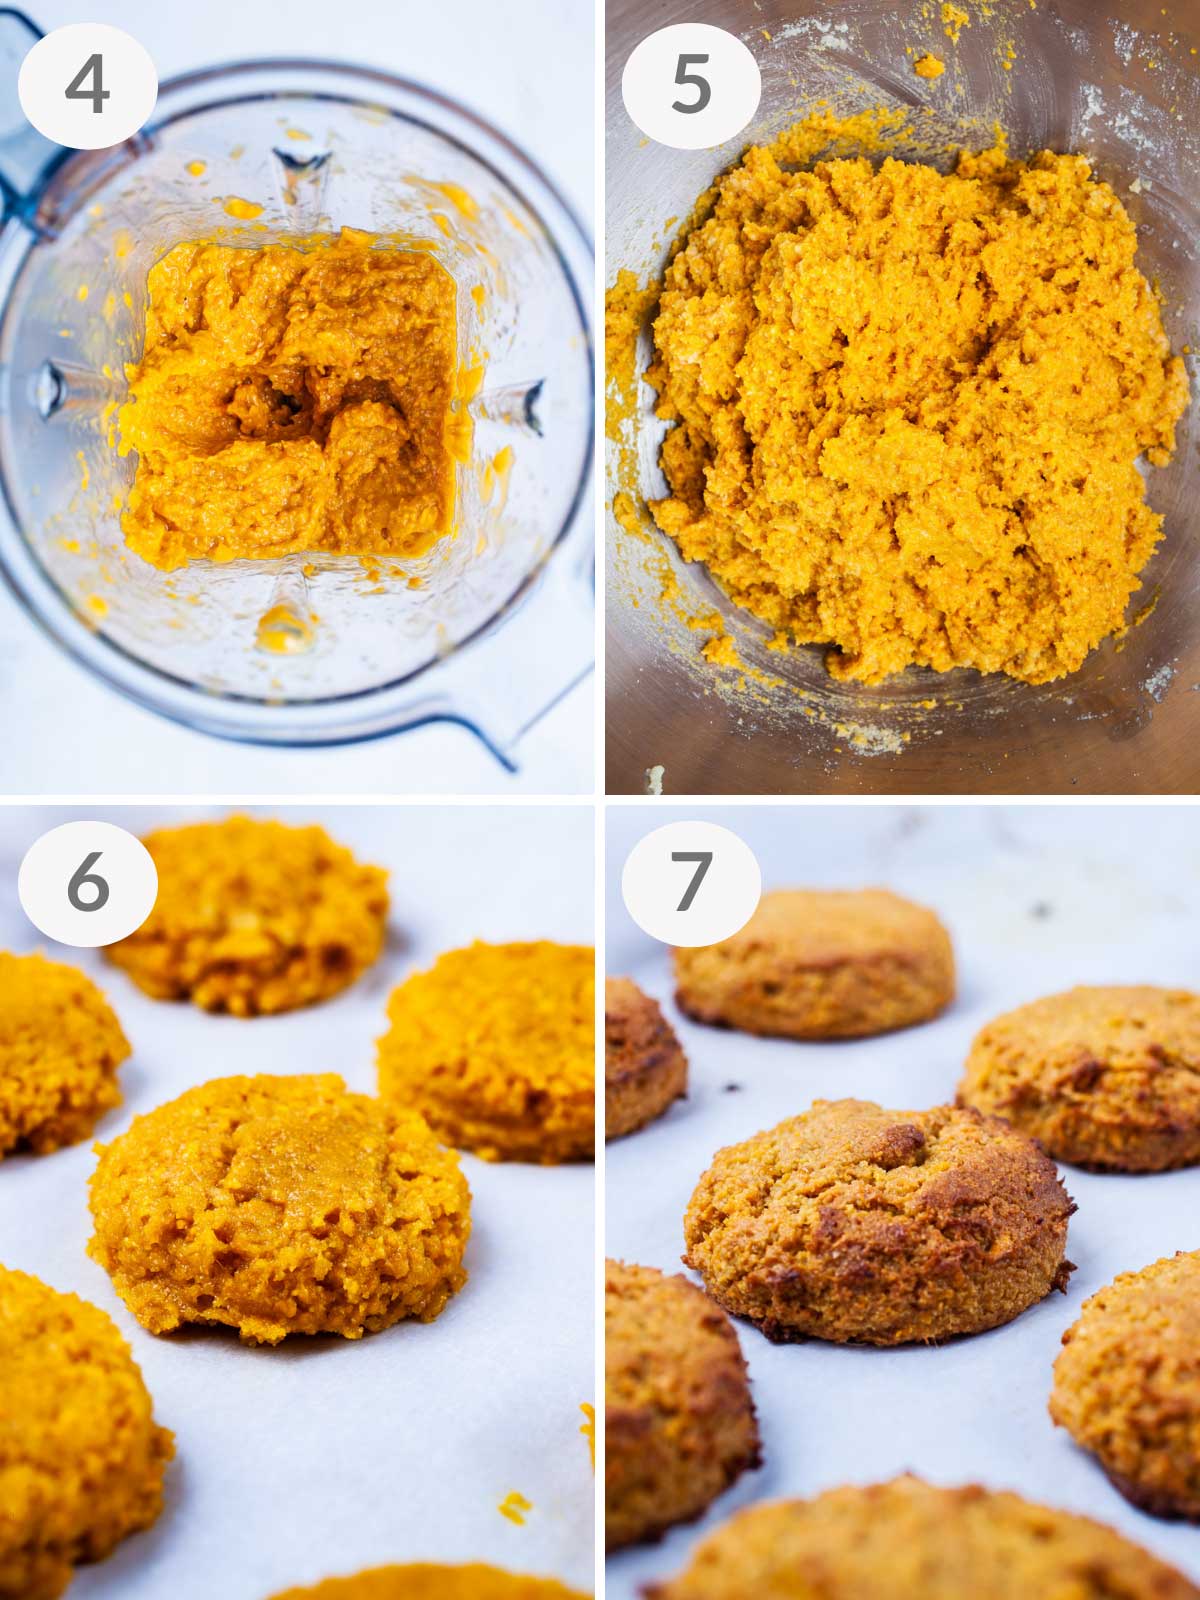 A series of steps showing how to prepare almond flour cookies with mangoes.